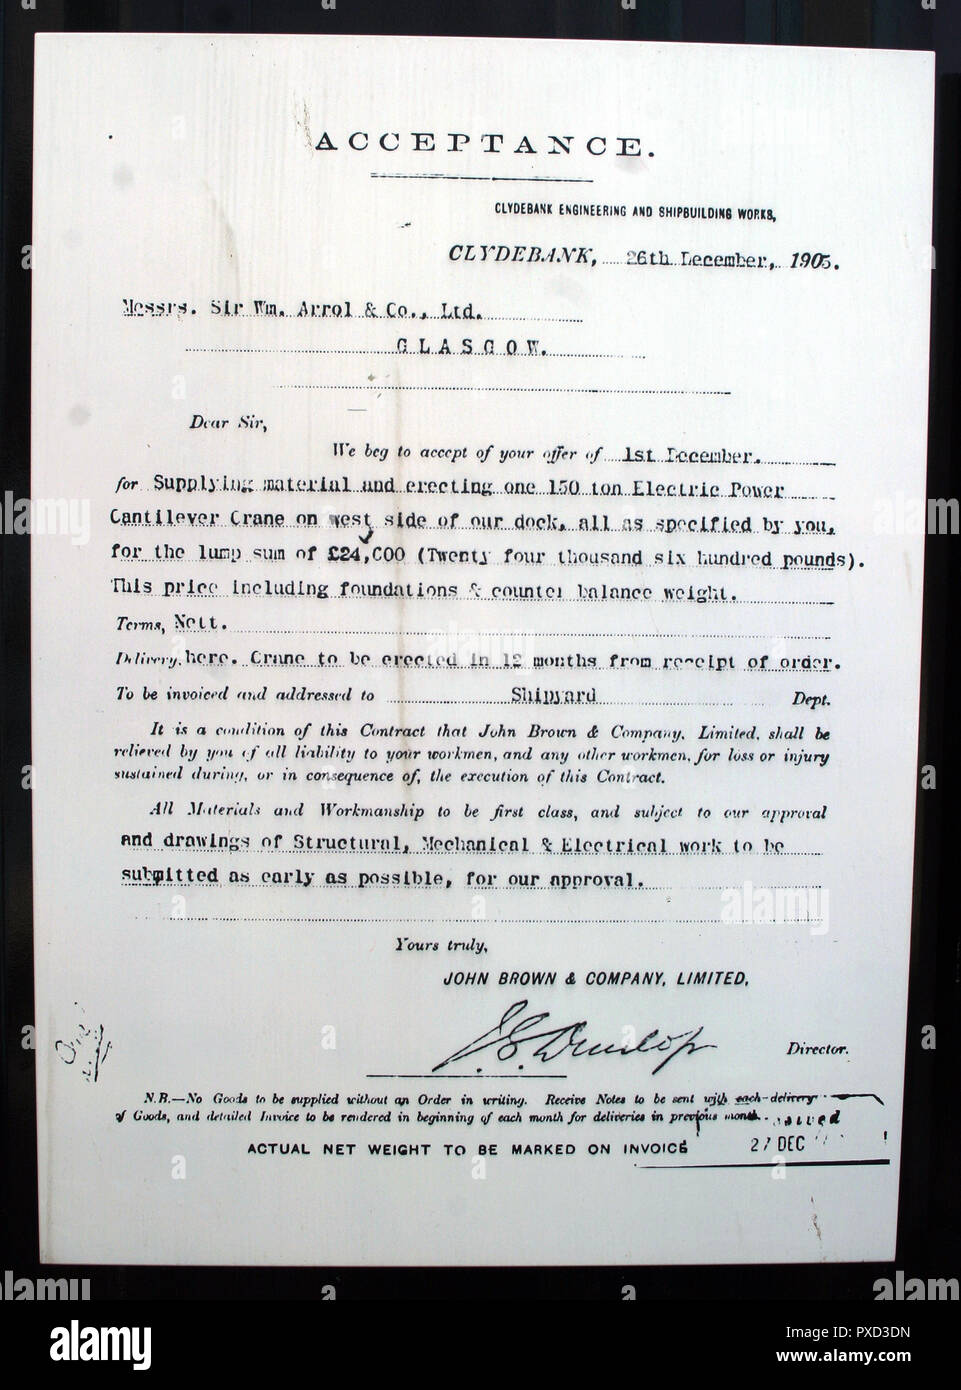 A copy of the original contract between John Brown, shipbuilders, and Wm Arrol, engineers, to build the Titan crane on the banks of the River Clyde in Clydebank for the sum of £24,600. A bargain, and it is still standing as a tourist attraction today. Stock Photo